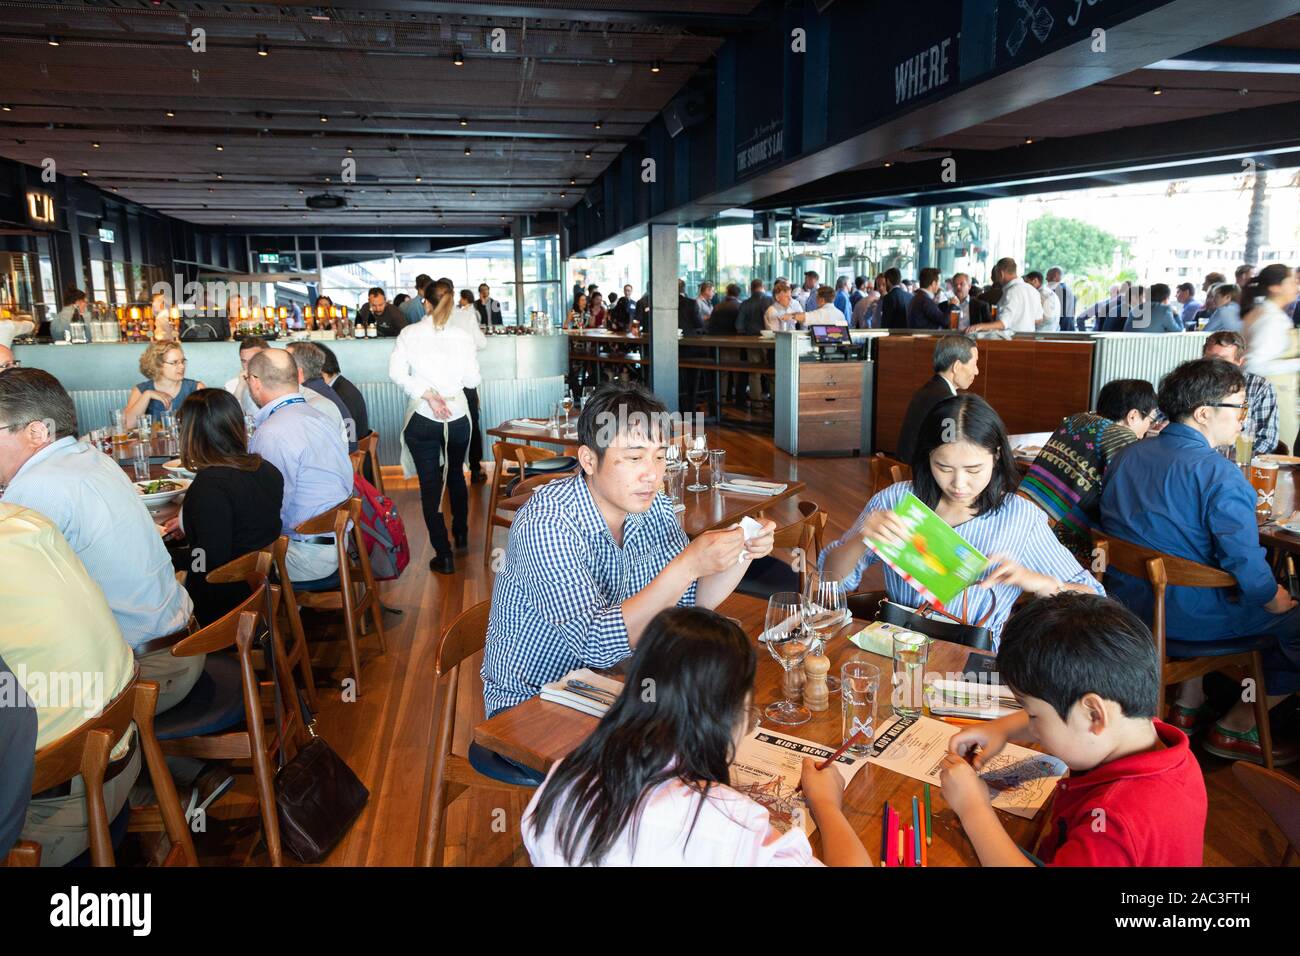 Sydney restaurant - People eating a meal inside Squires Landing - a restaurant in Circular Quay, Sydney Harbour, Sydney, Australia Stock Photo